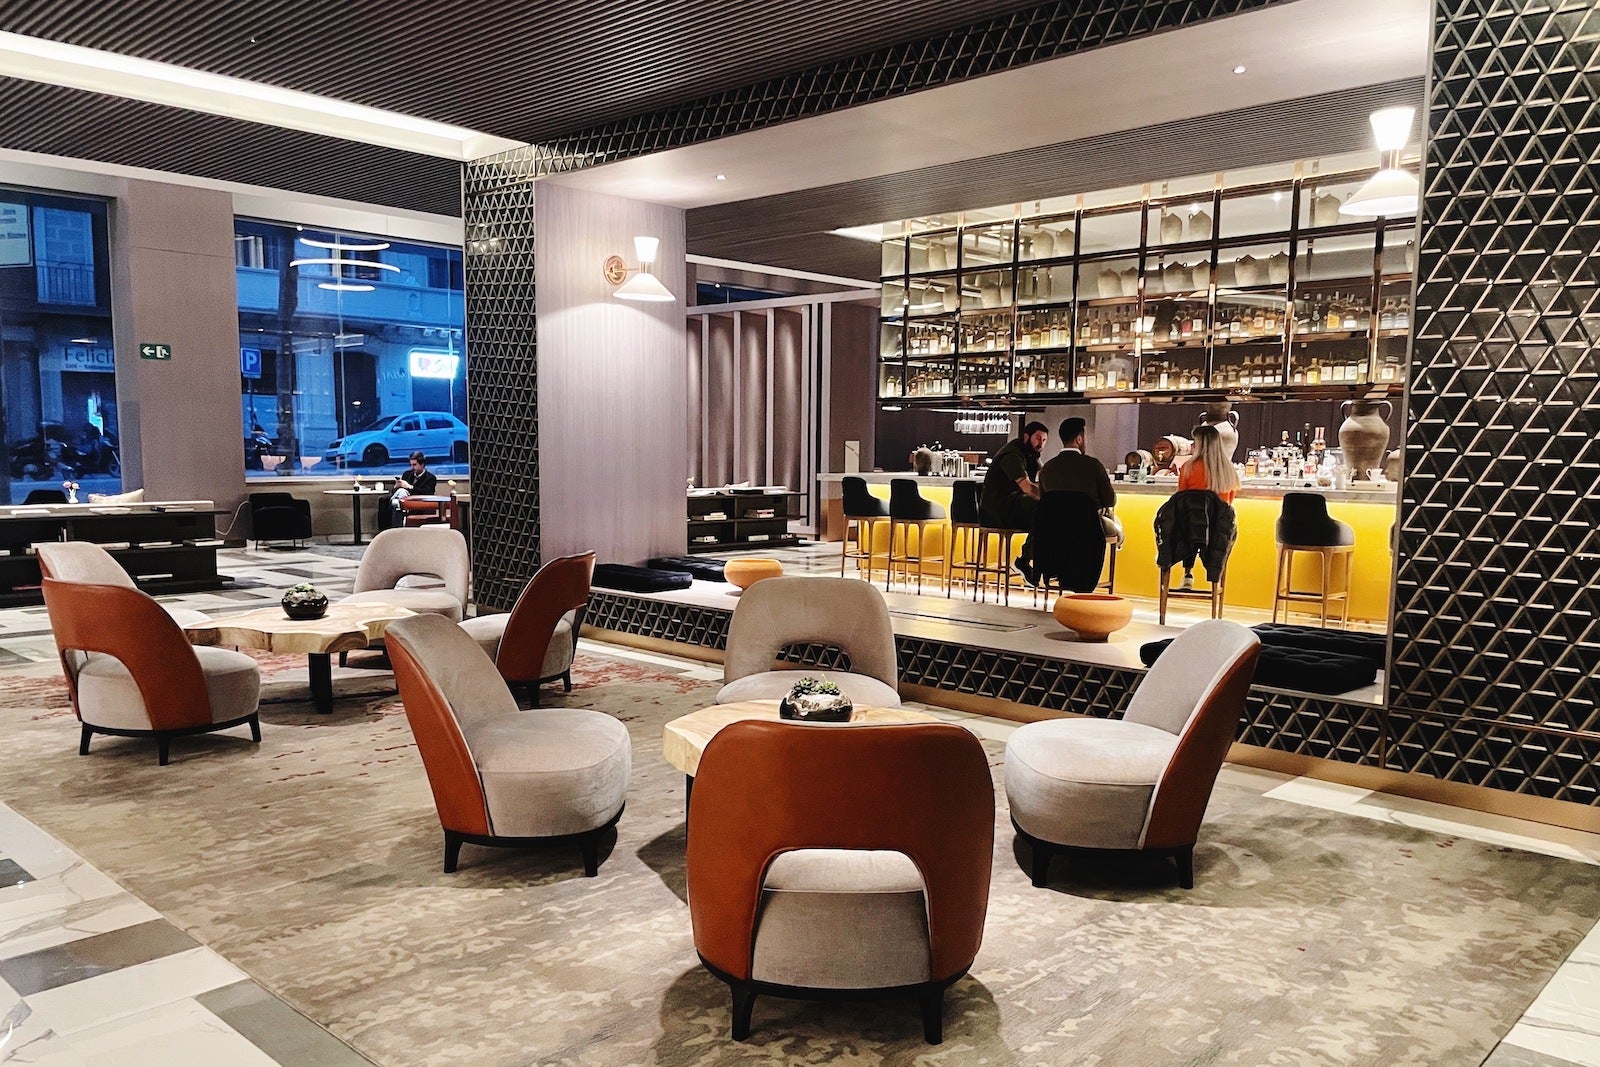 hotel lobby bar with living room-style seating and beautiful gold bar framed by black, geometric wall